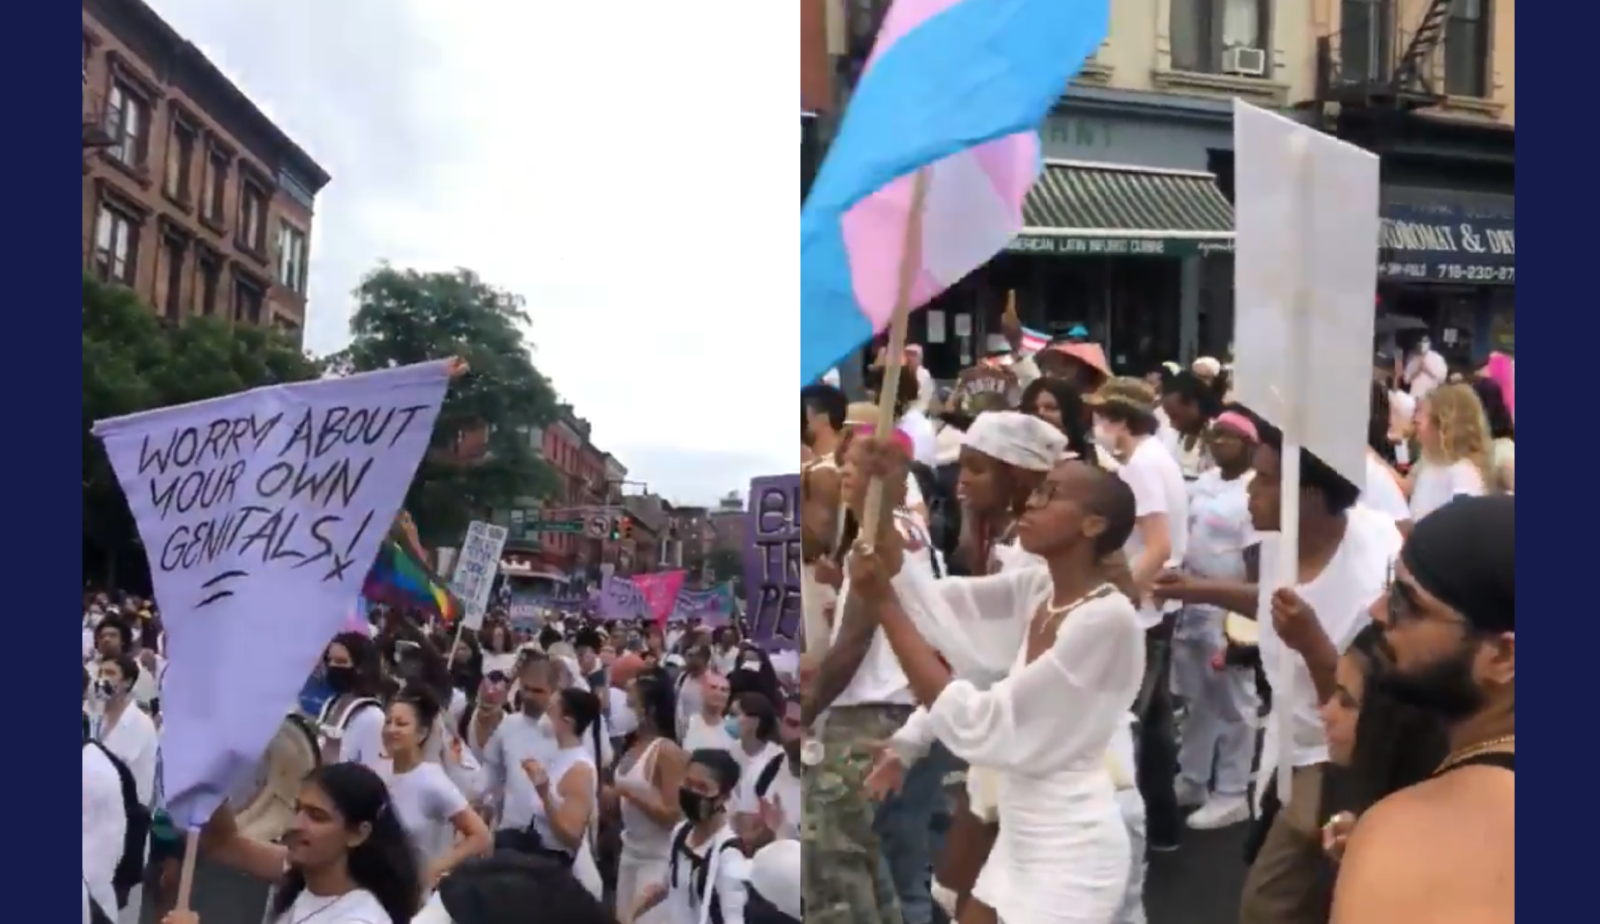 Donned in white and carrying signs such as "worry about your own genitals," hundreds danced and marched down the streets of Brooklyn for the second annual Brooklyn Liberation March.